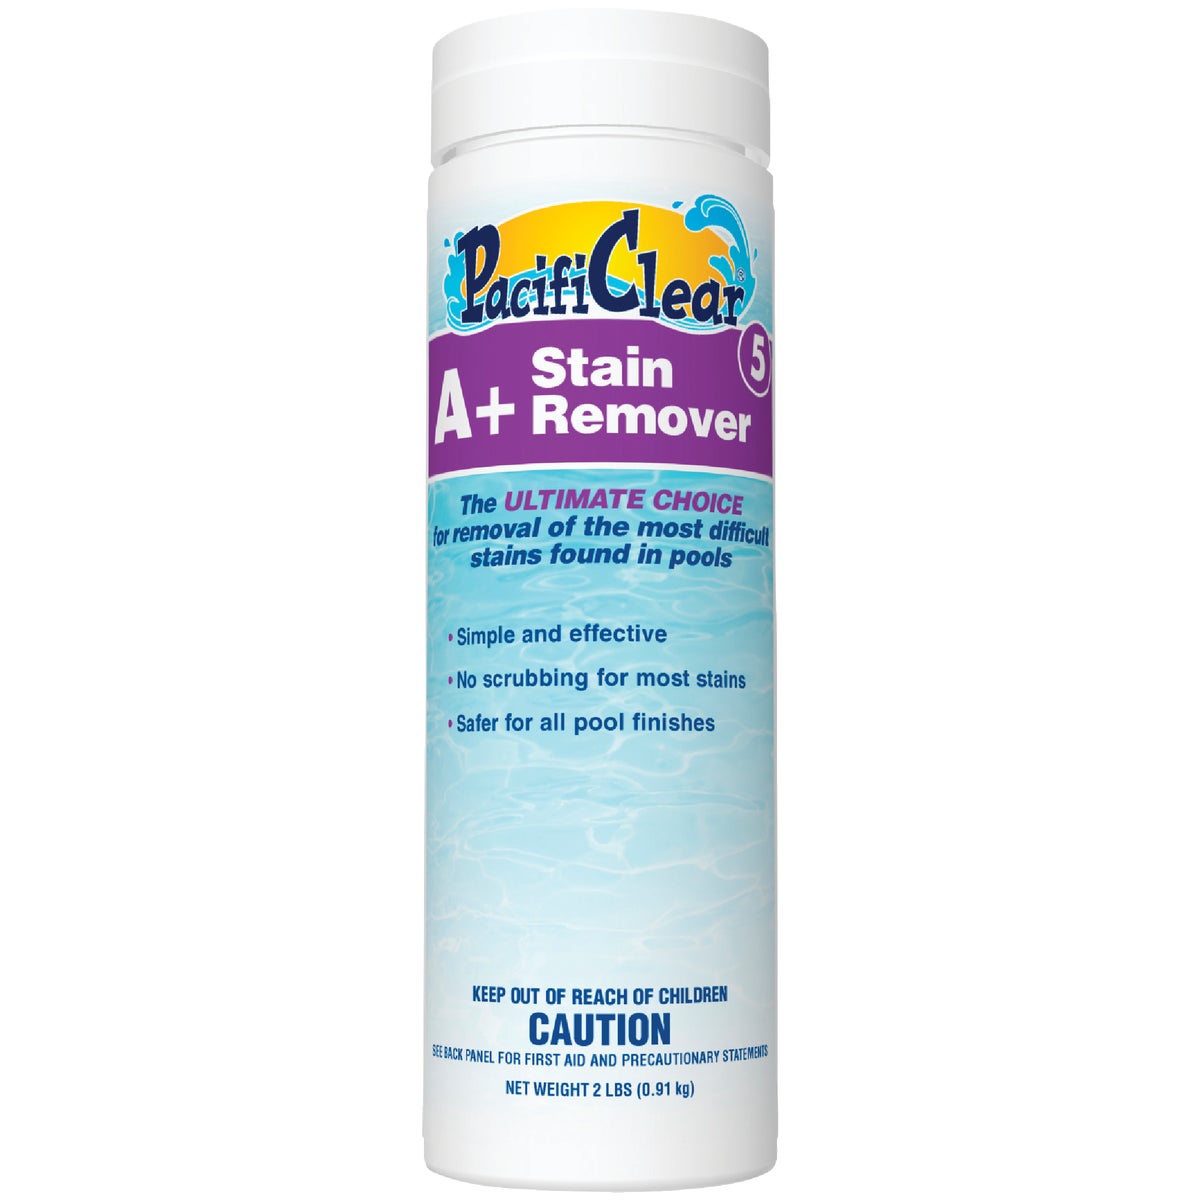 Item 800645, A+ stain remover is a granular product that is an effective and 